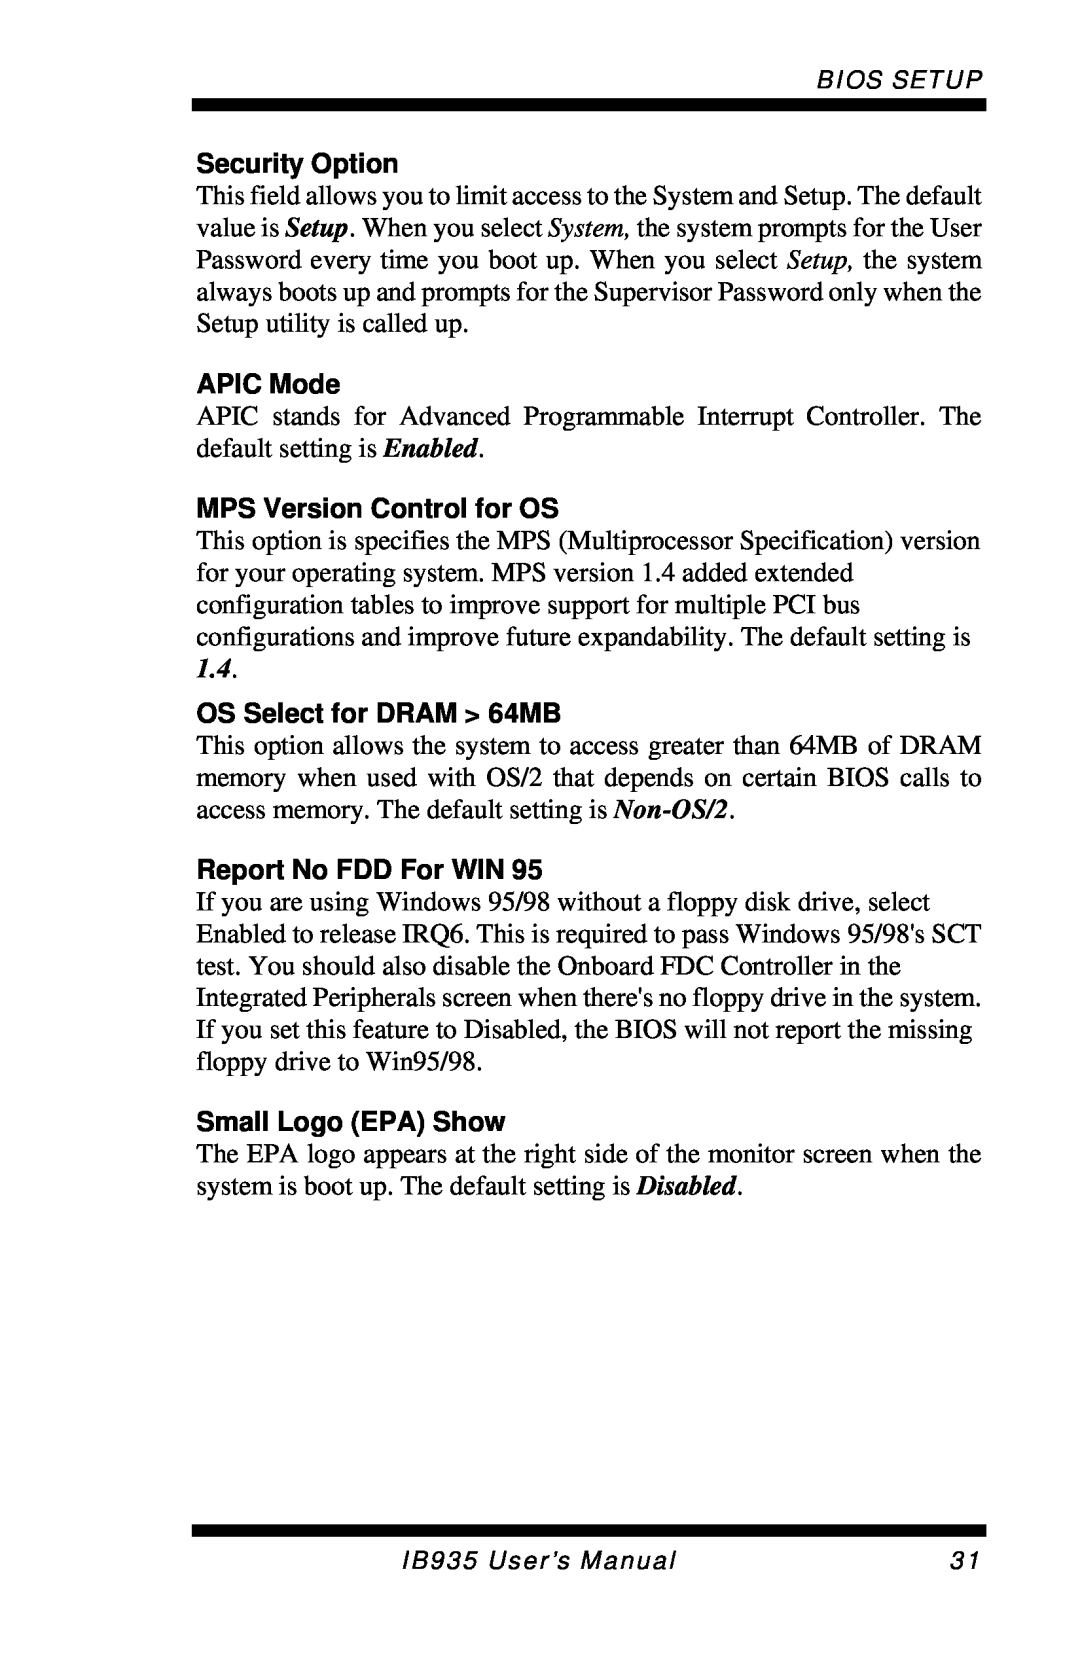 Intel IB935 Security Option, APIC Mode, MPS Version Control for OS, OS Select for DRAM 64MB, Report No FDD For WIN 